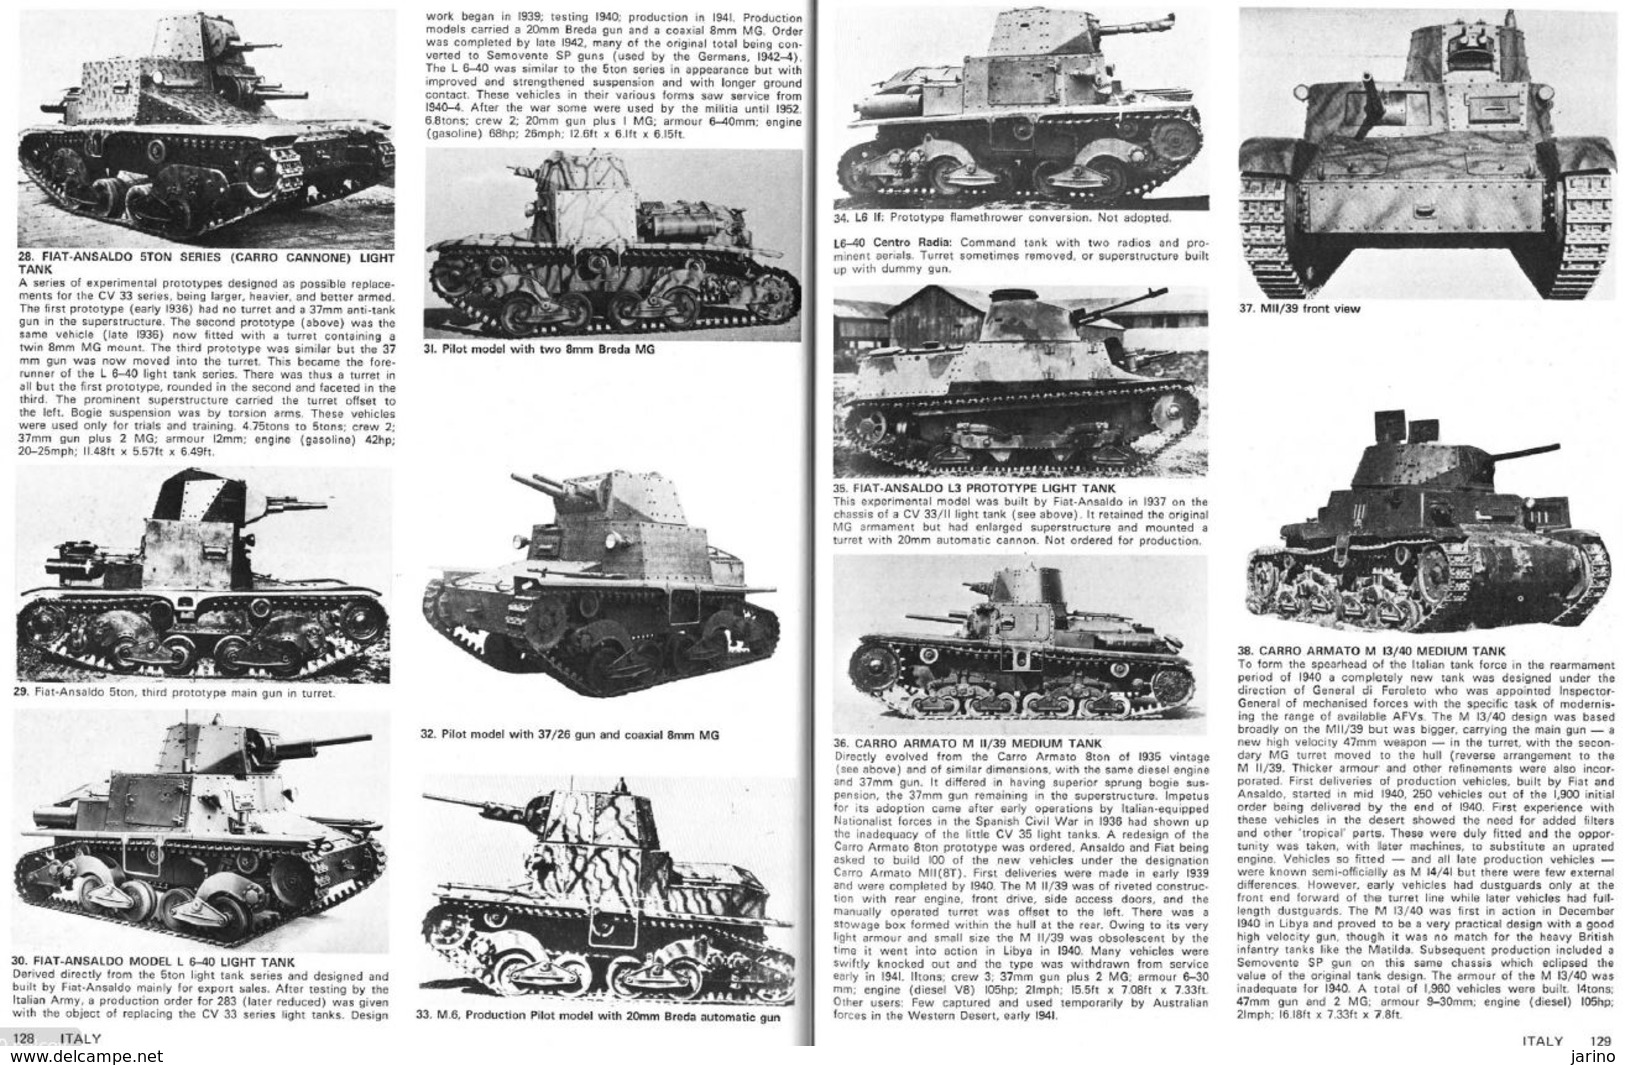 Tanks of the World 1915-1945, issue 2002 UK, 257 pages sur DVD, more than 1000 photographs